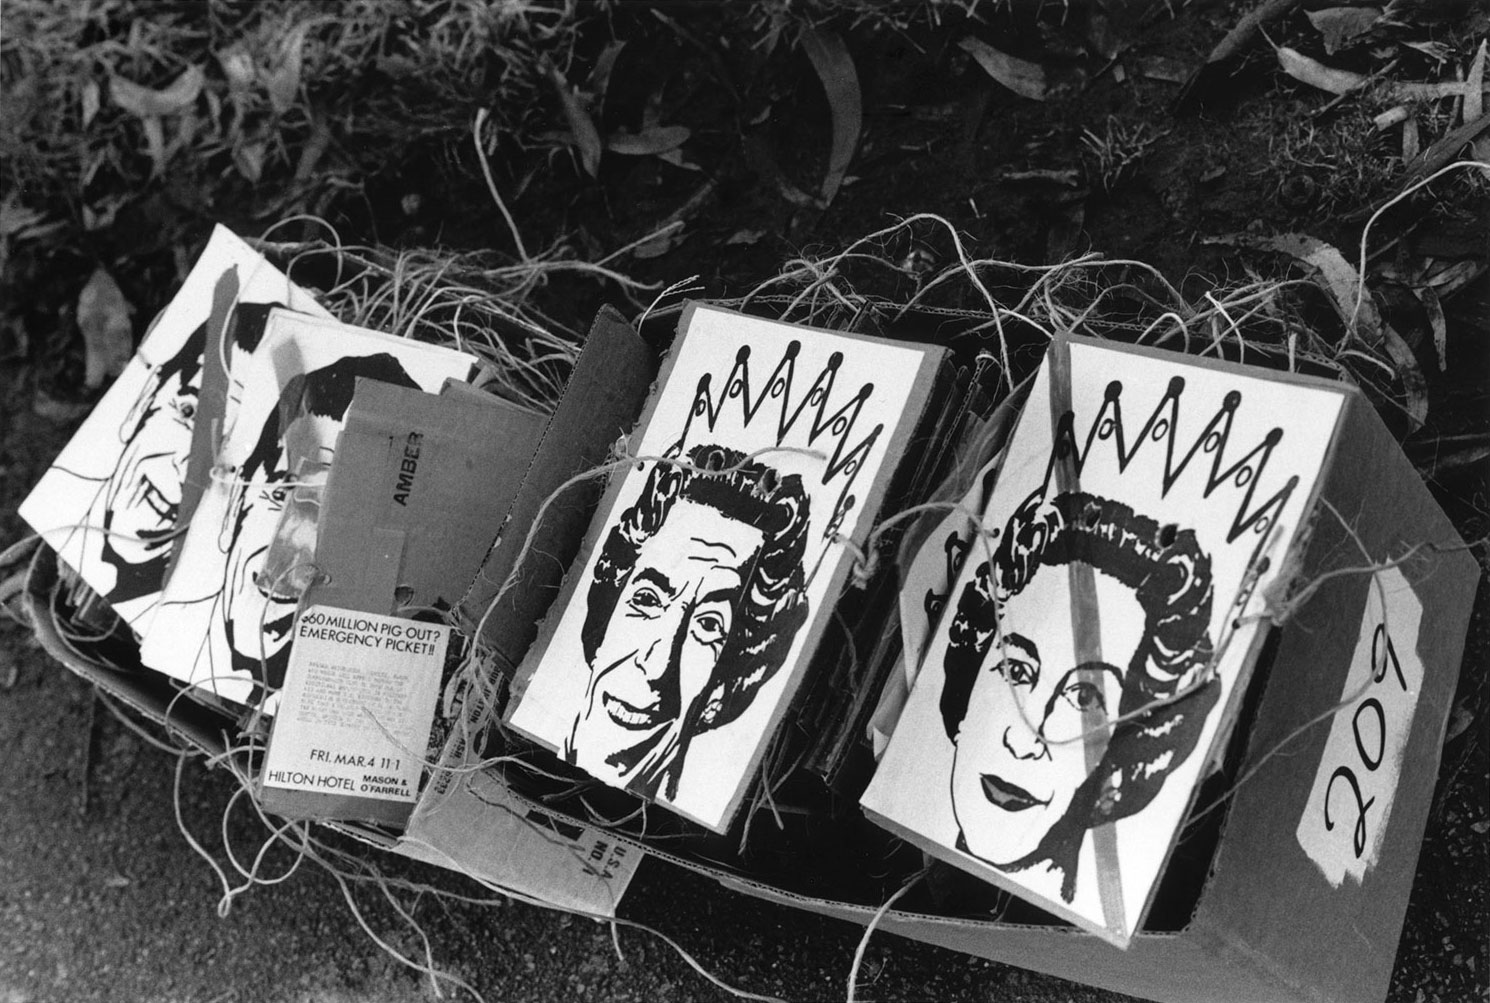  Ronald Reagan and the Queen come to dinner protest masks, Golden Gate Park, 1983 